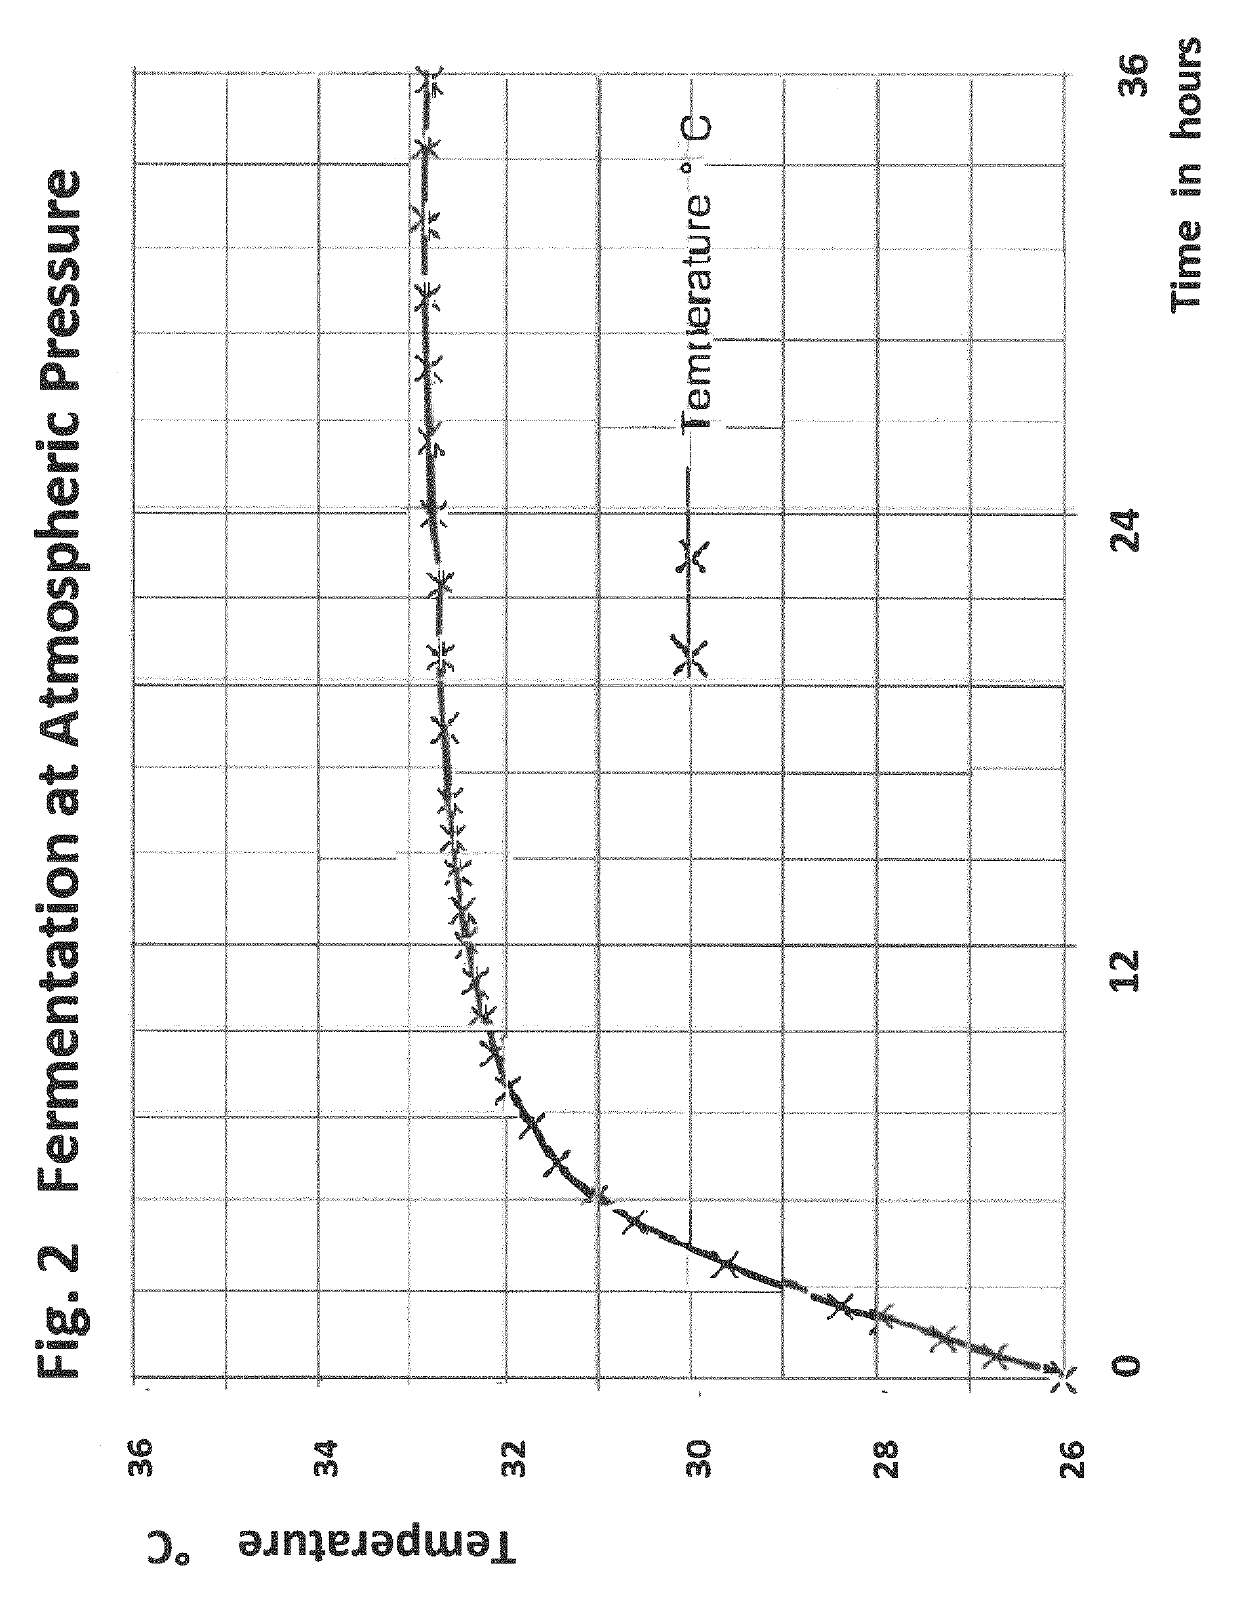 Vertical plug-flow process for simultaneous production of ethanol and a fermented, solid transformation product of the substrate